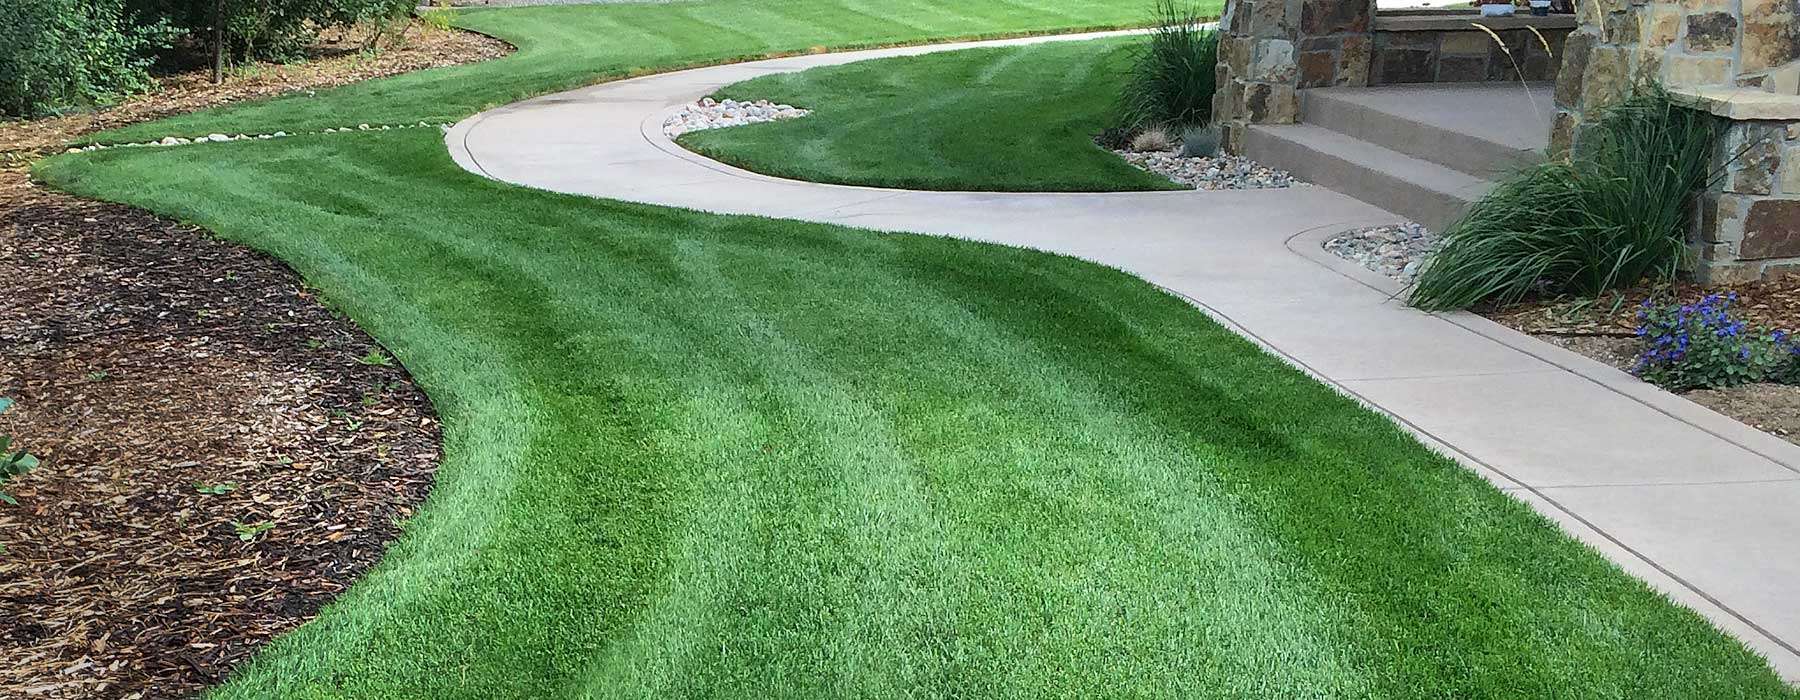 Watering your established lawn varies depending on time of year, weather, sun, shade, slope, wind and temperatures.